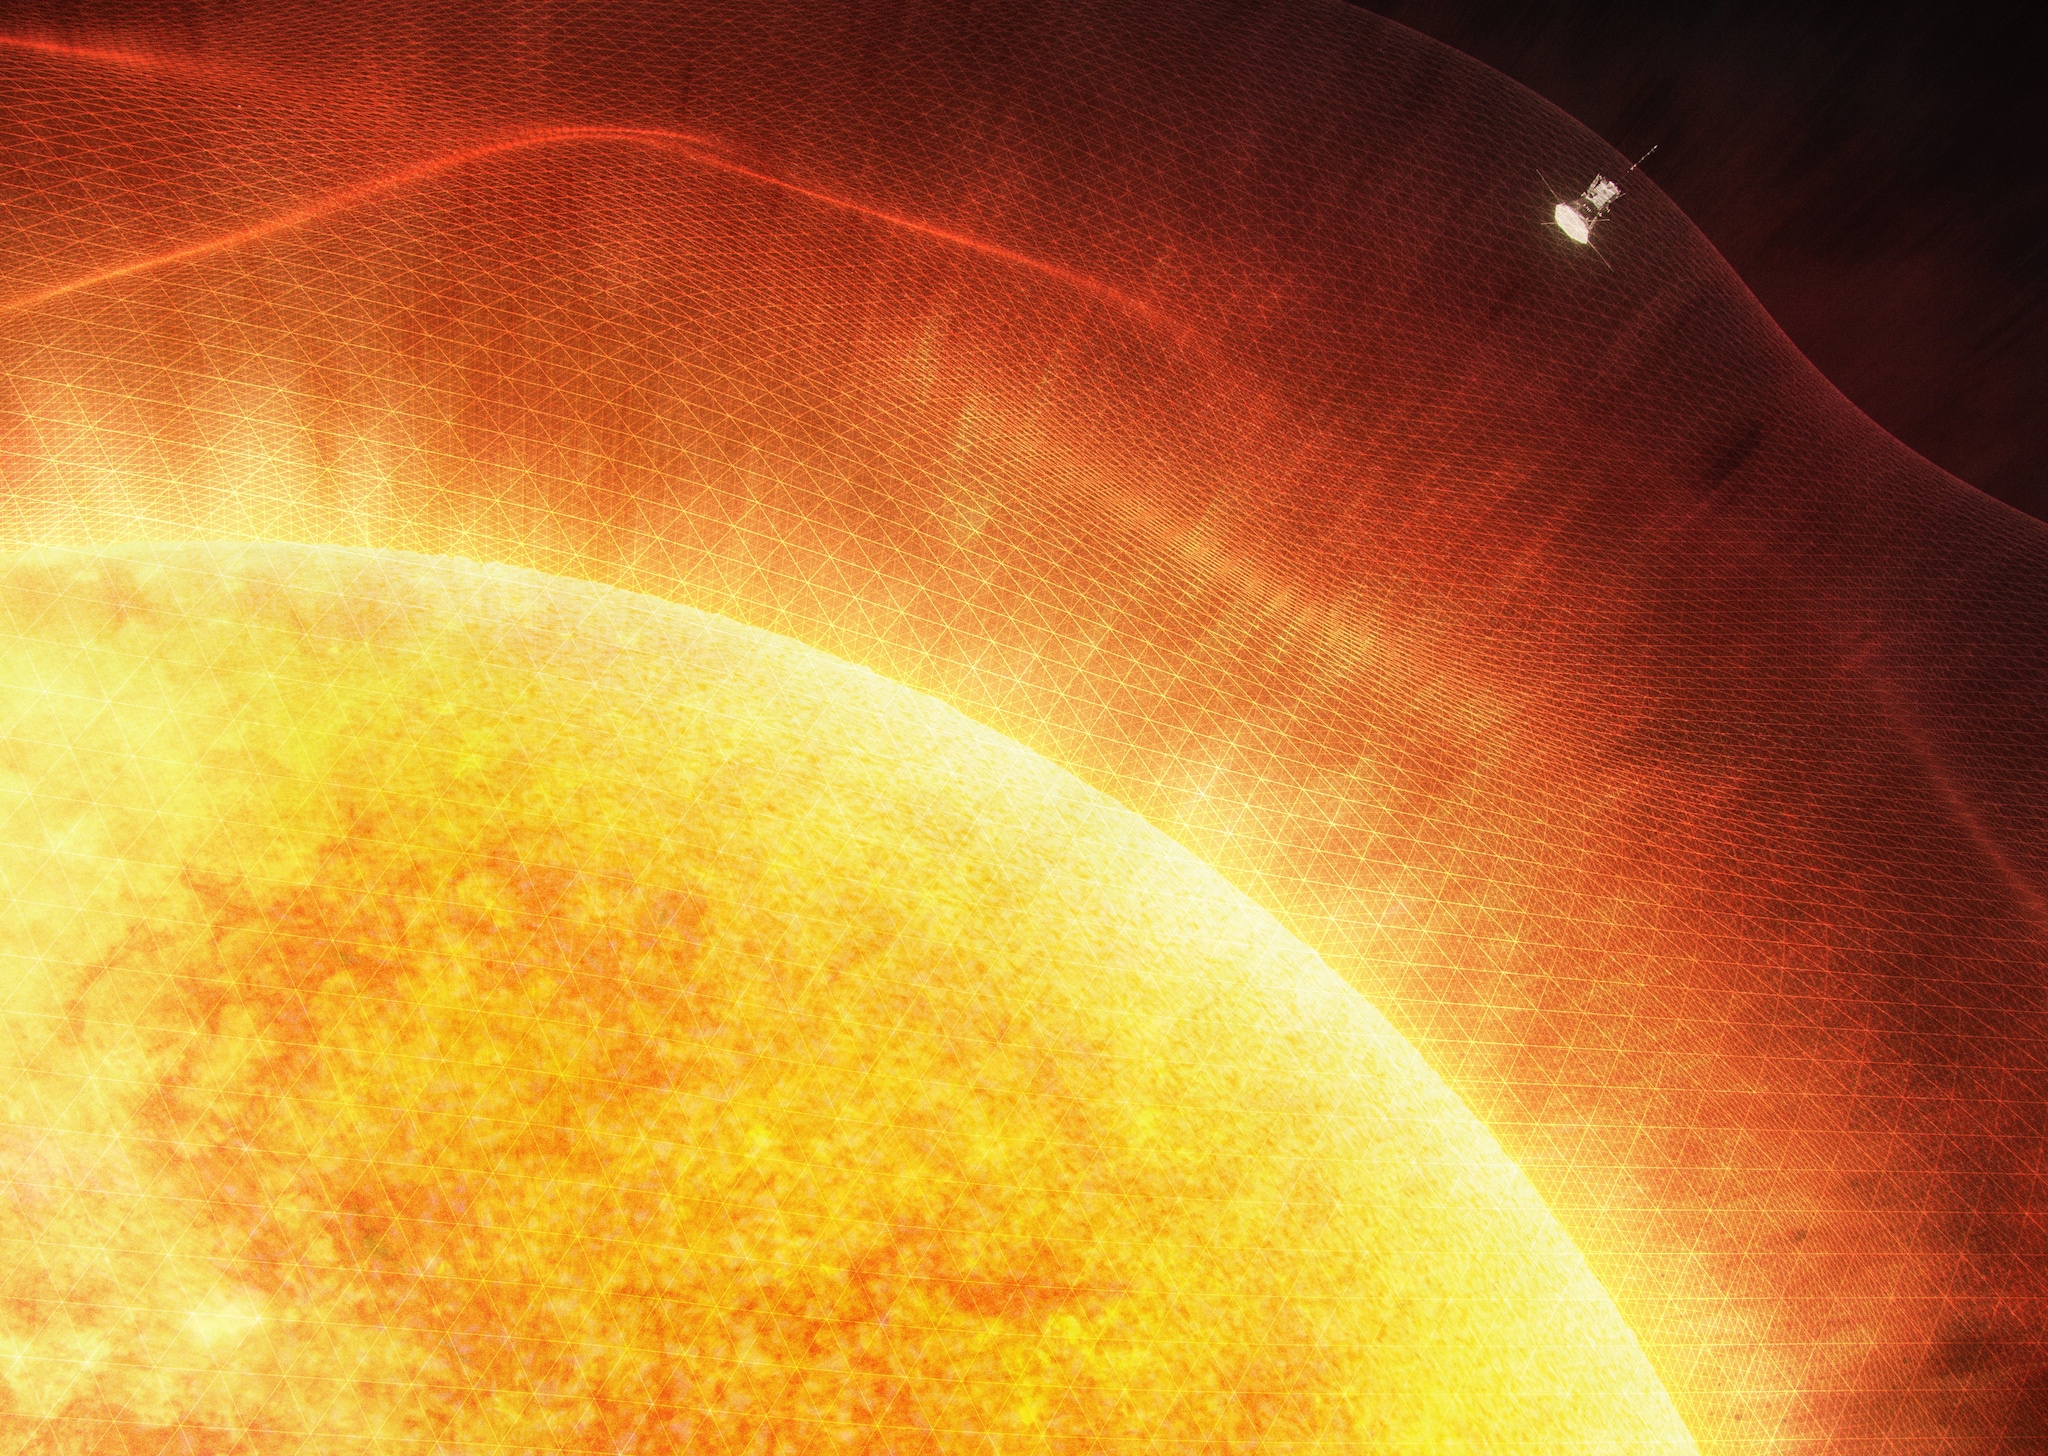 Parker Solar Probe: The first spacecraft in astronomical history to enter the Sun's surface atmosphere.